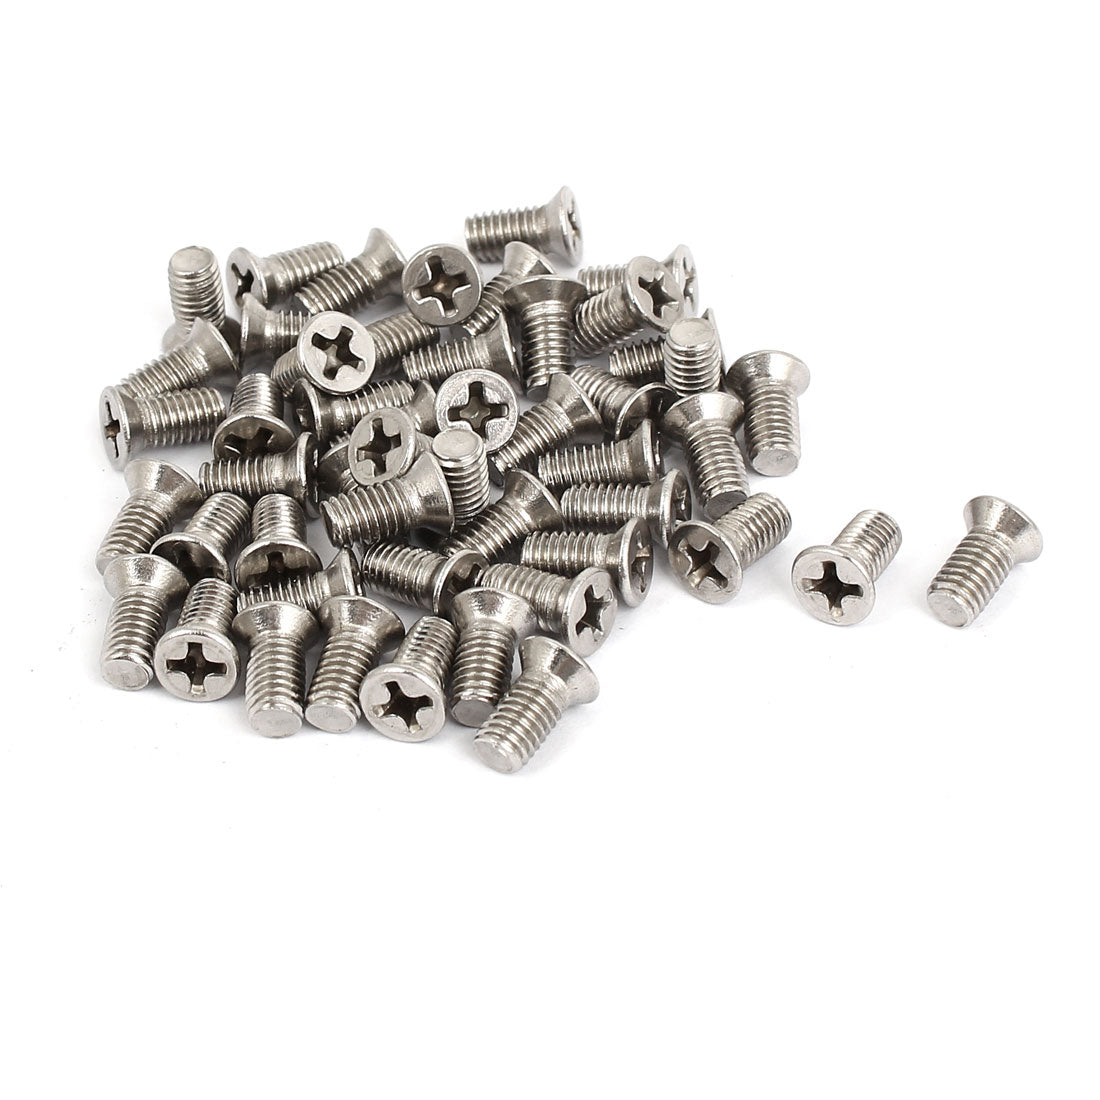 uxcell Uxcell M5x10mm Stainless Steel Countersunk Flat Head Cross Phillips Screw Bolts 50pcs